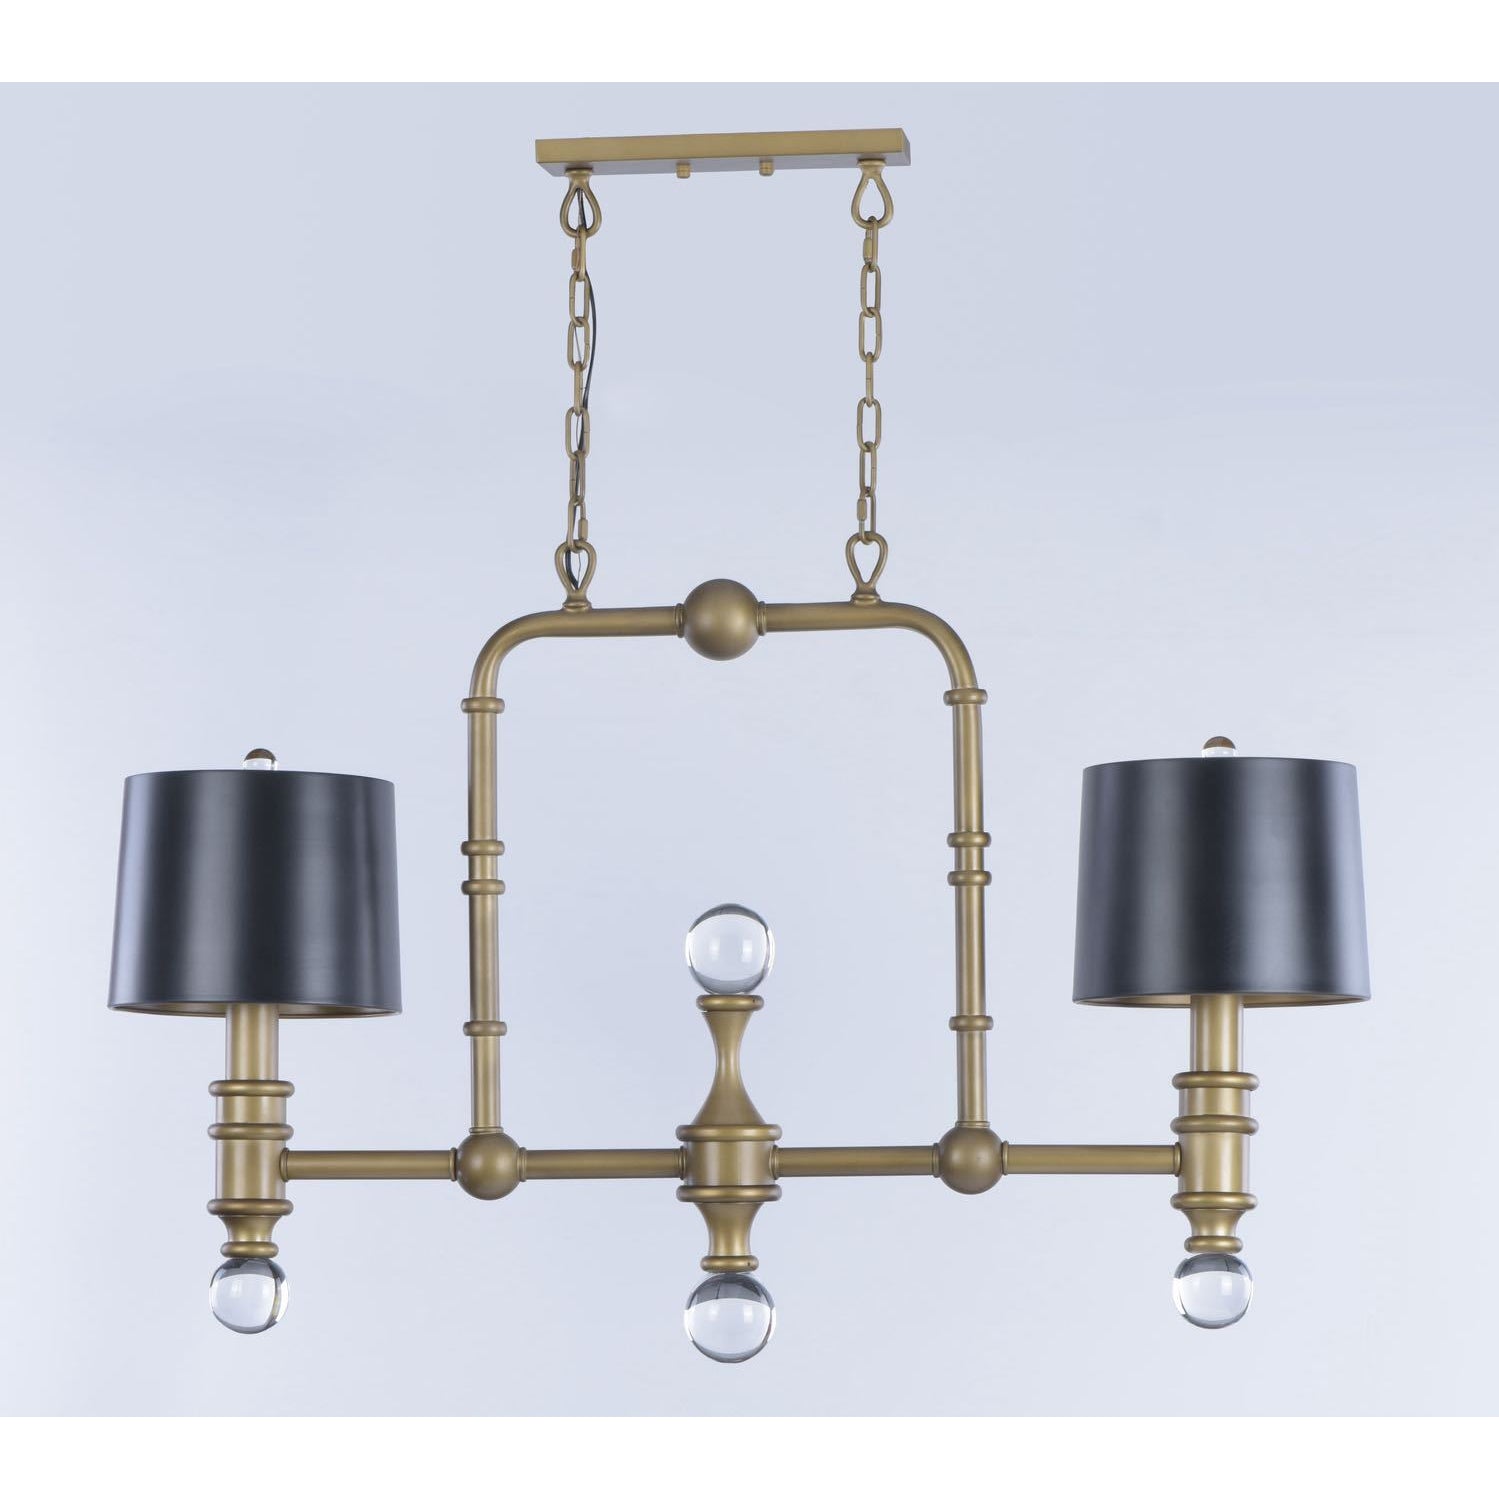 Saloon Linear Suspension Weathered Brass